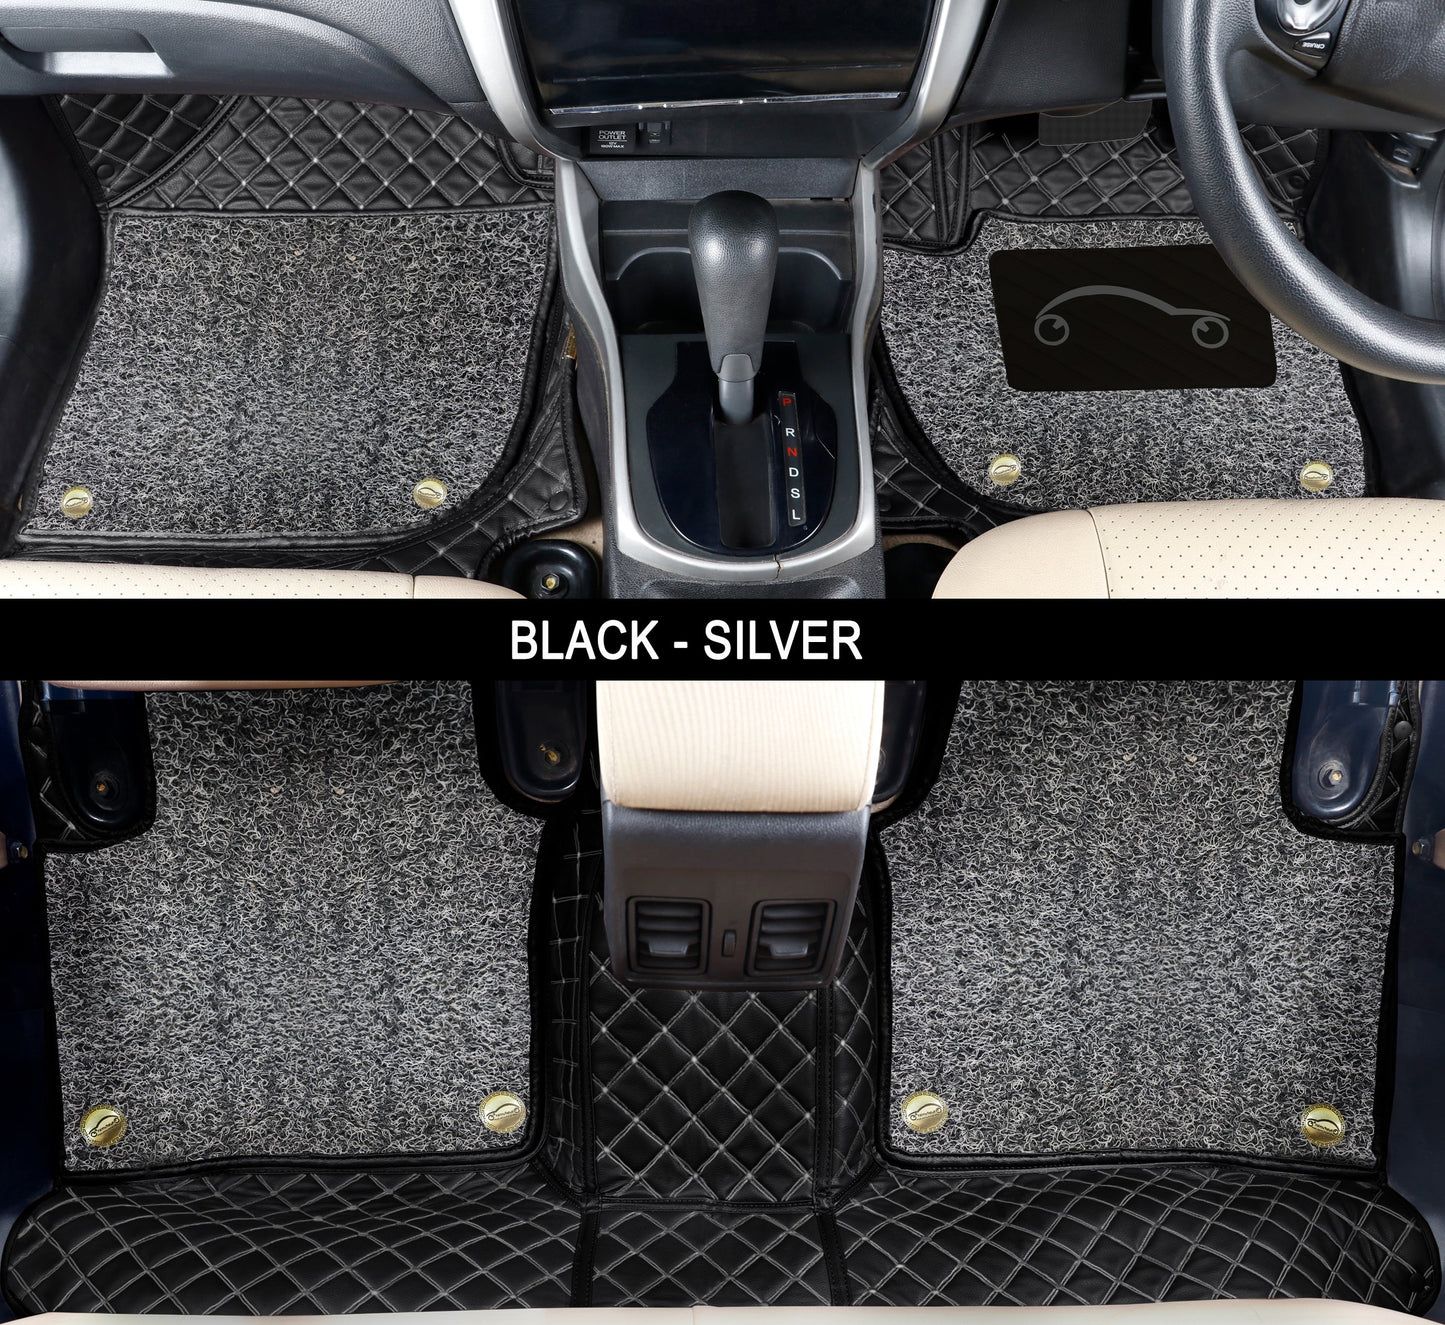 Mercedes G 63 AMG 2021 7D Luxury Car Mat, All Weather Proof, Anti-Skid, 100% Waterproof & Odorless with Unique Diamond Fish Design (24mm Luxury PU Leather, 2 Rows)